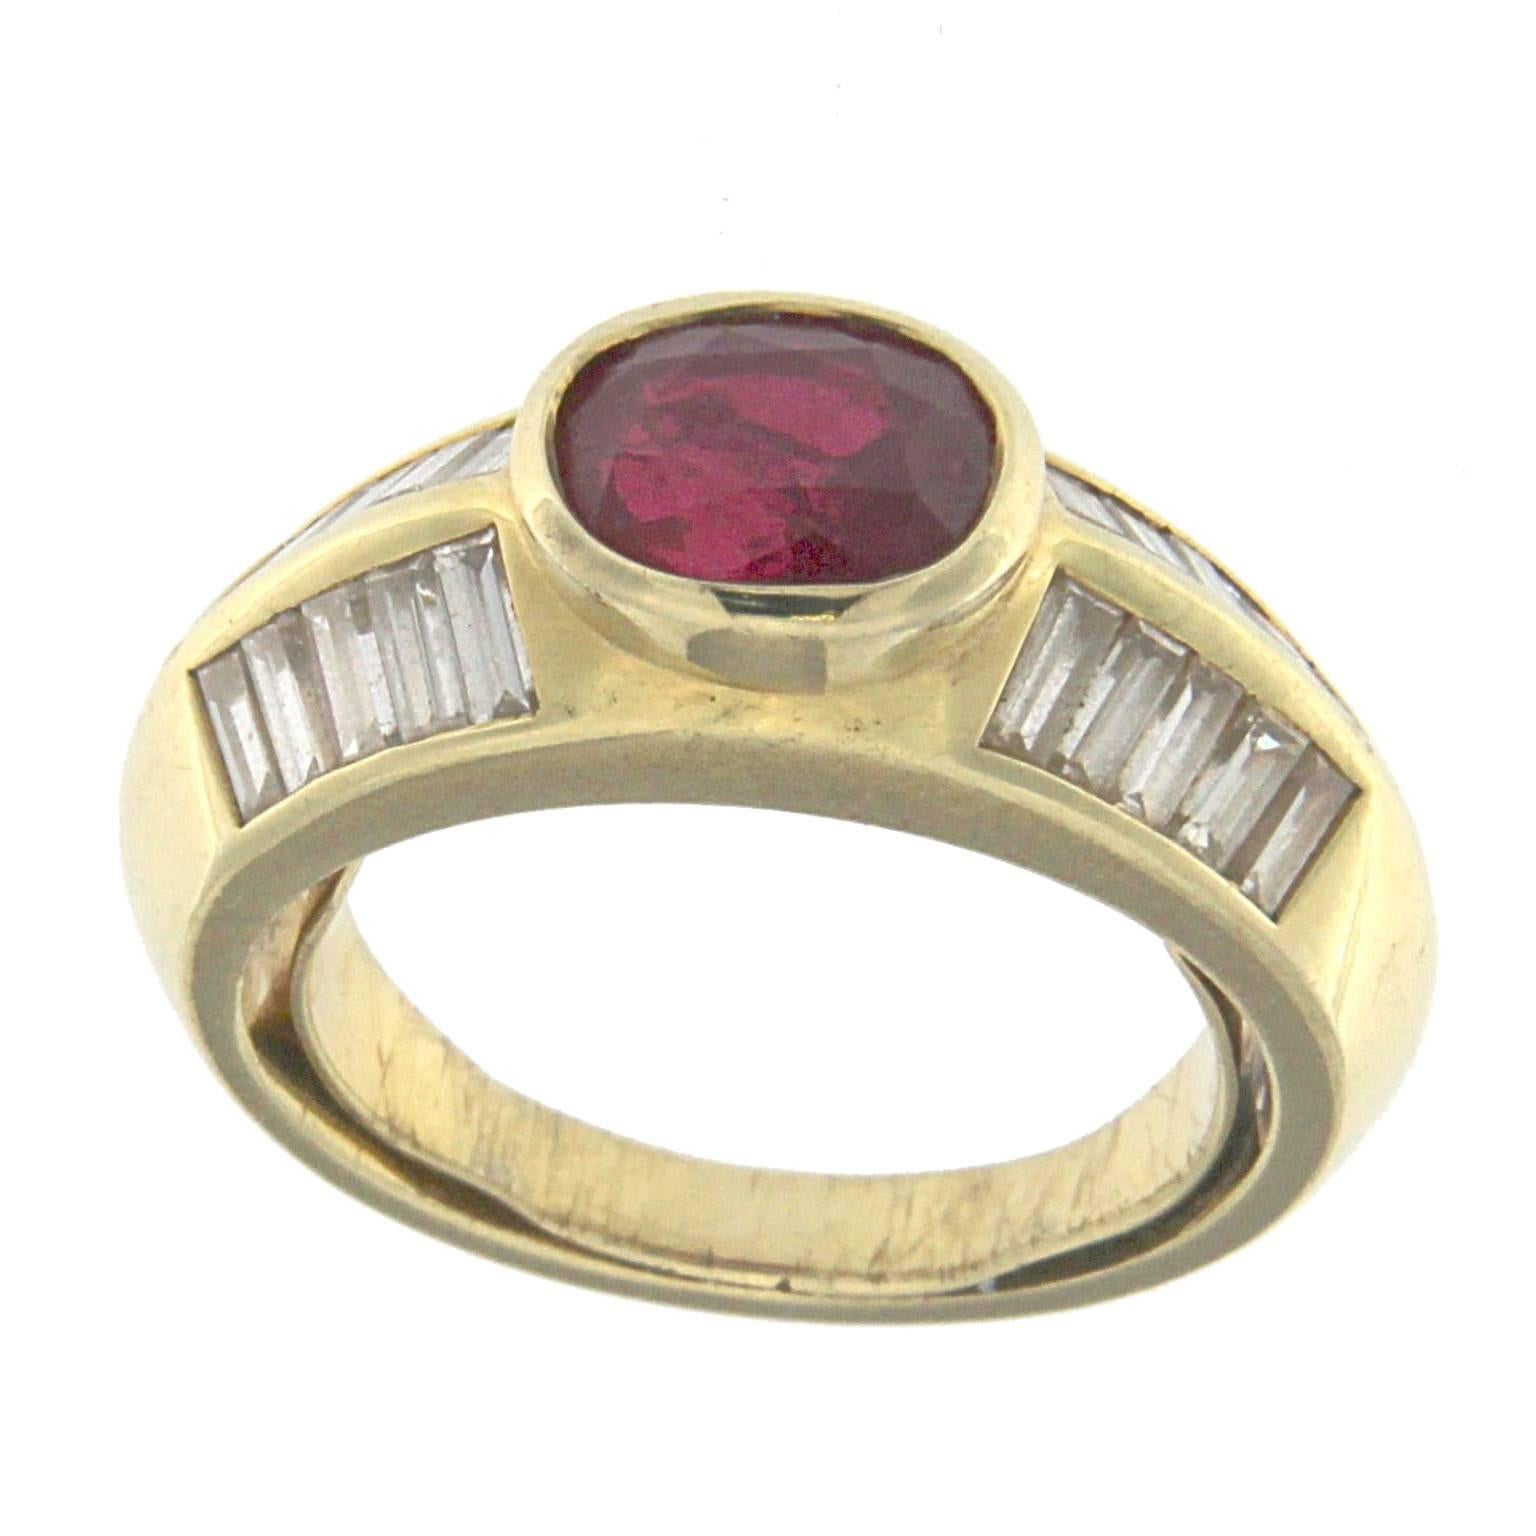 Ring in 18 kt  yellow gold with ruby and white diamonds 

the total weight of the gold is  gr 8.4
the total weight of the white diamonds is ct 1.06 - color GH clarity VVS1
the total weight of the ruby is ct 1.65

STAMP: 10 MI ITALY 750
US SIZE 6
